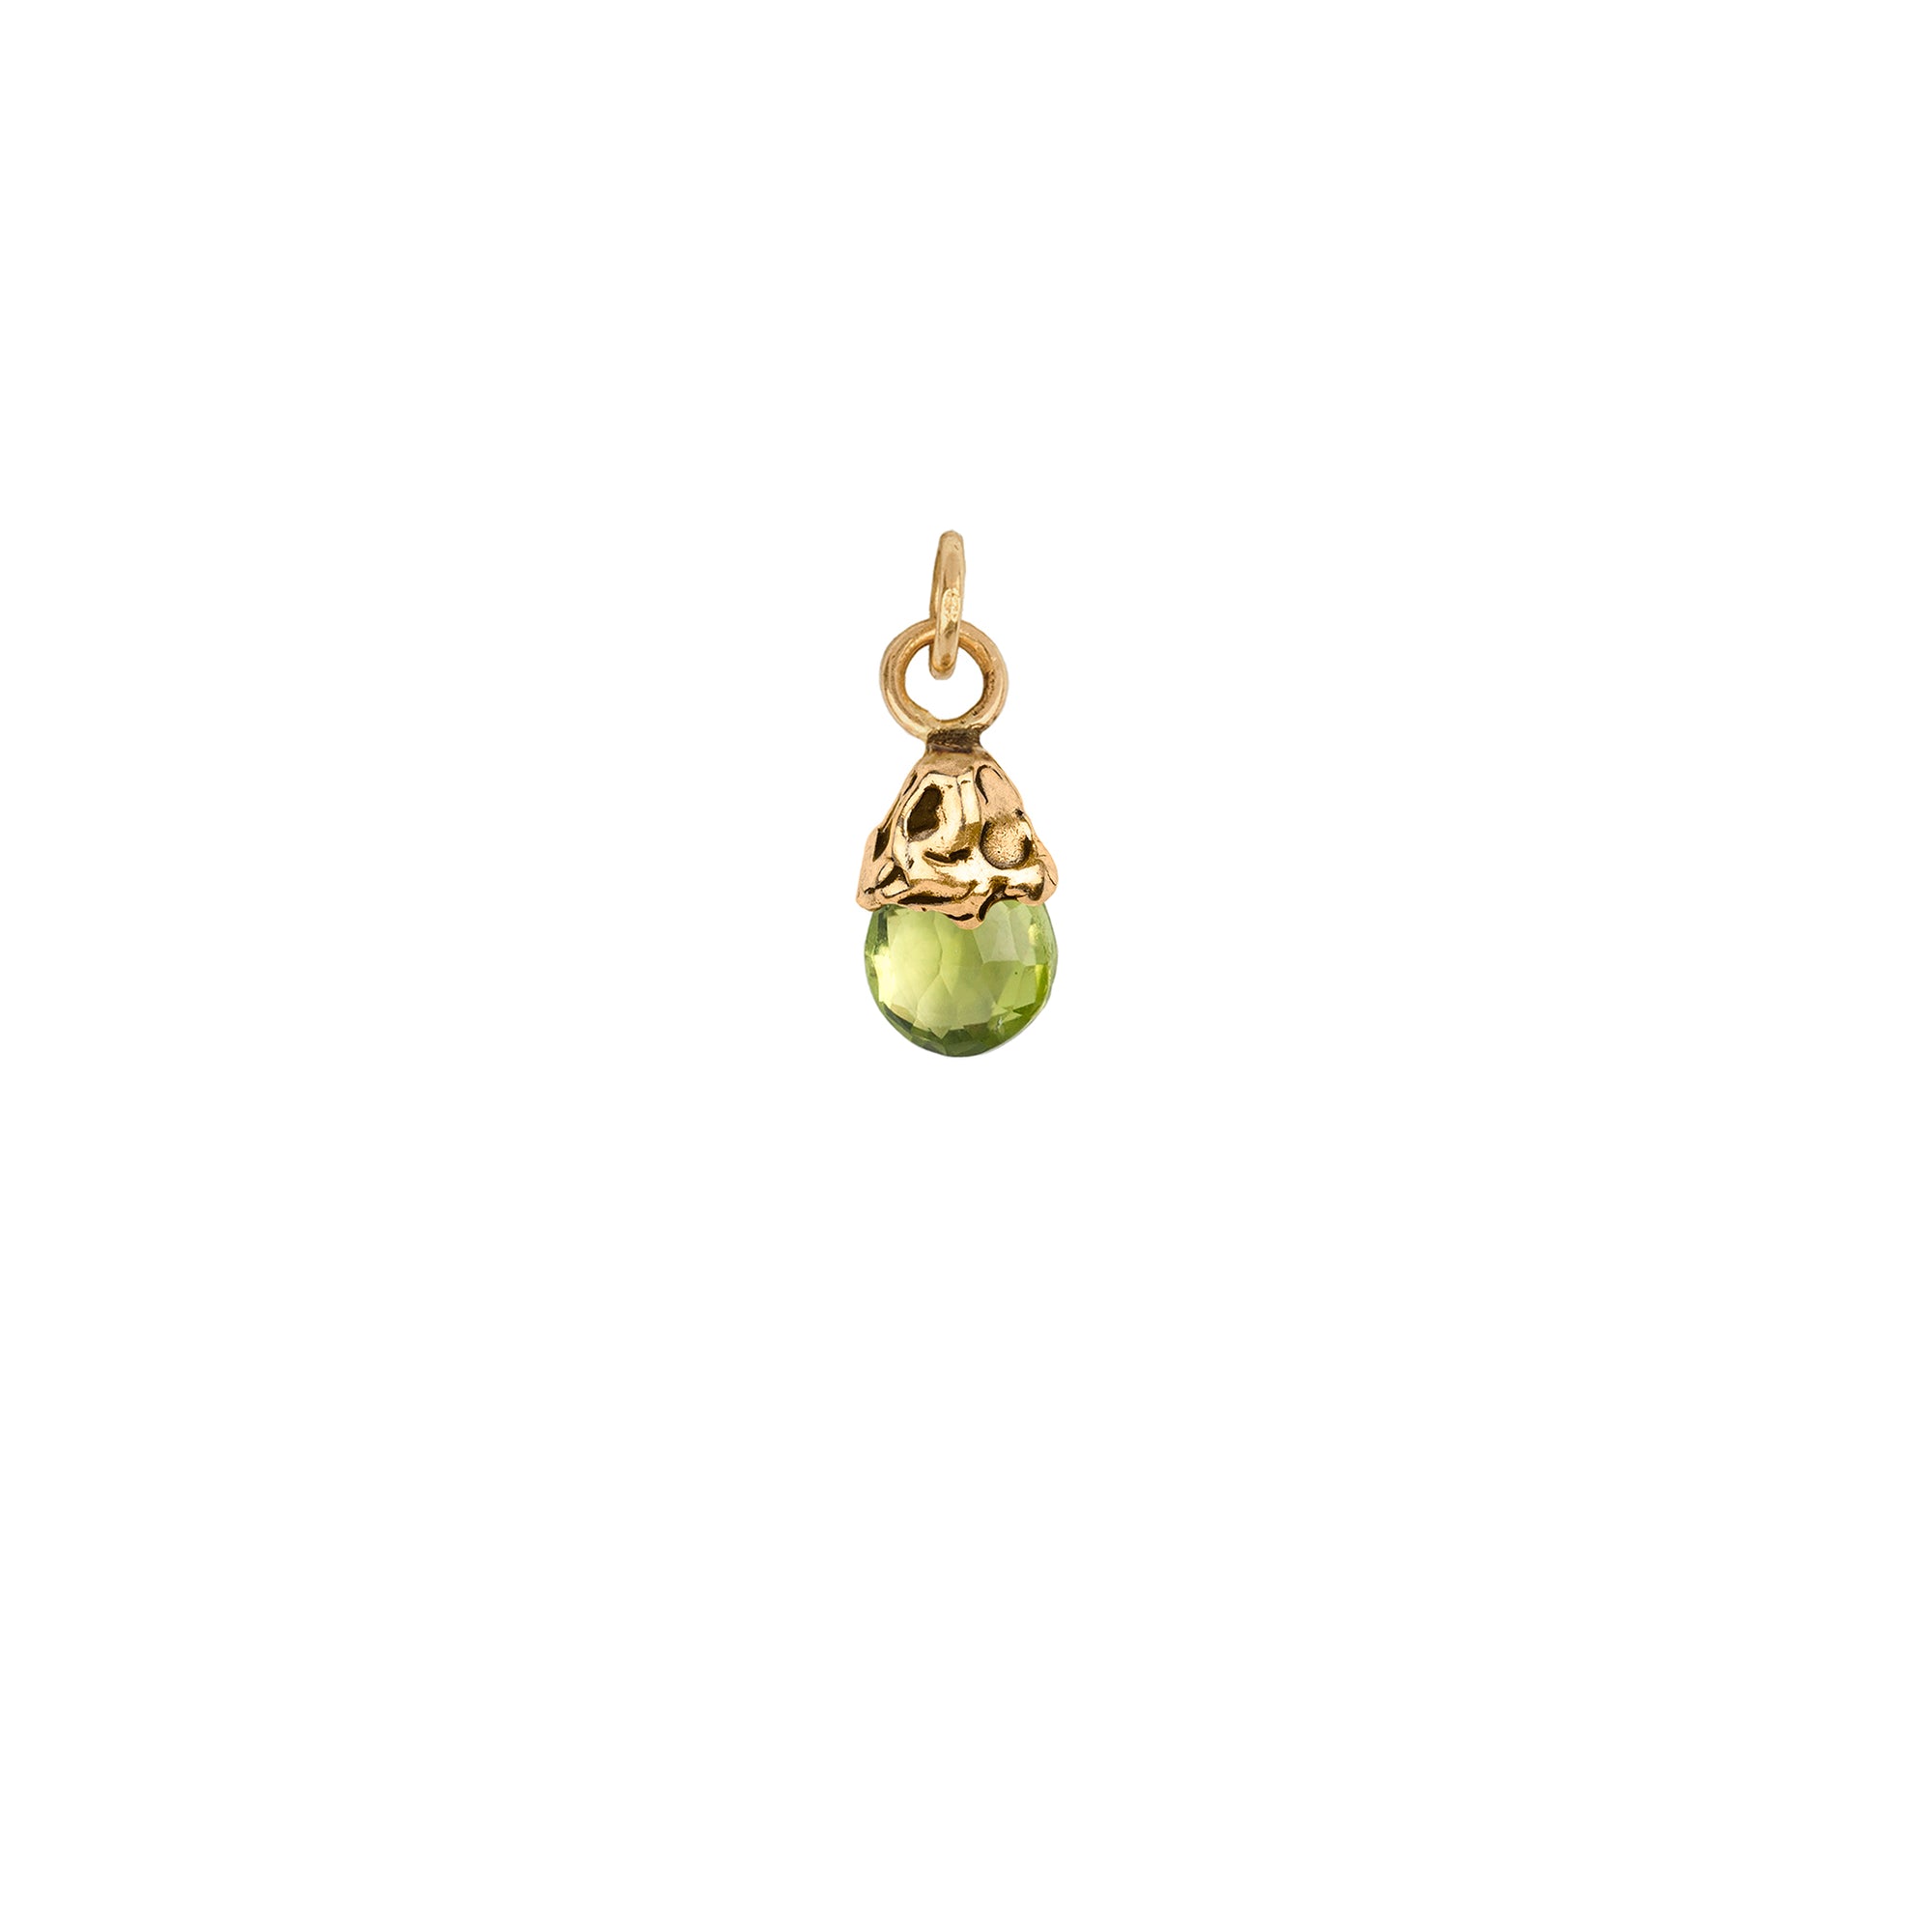 Positivity 14K Gold Capped Attraction Charm